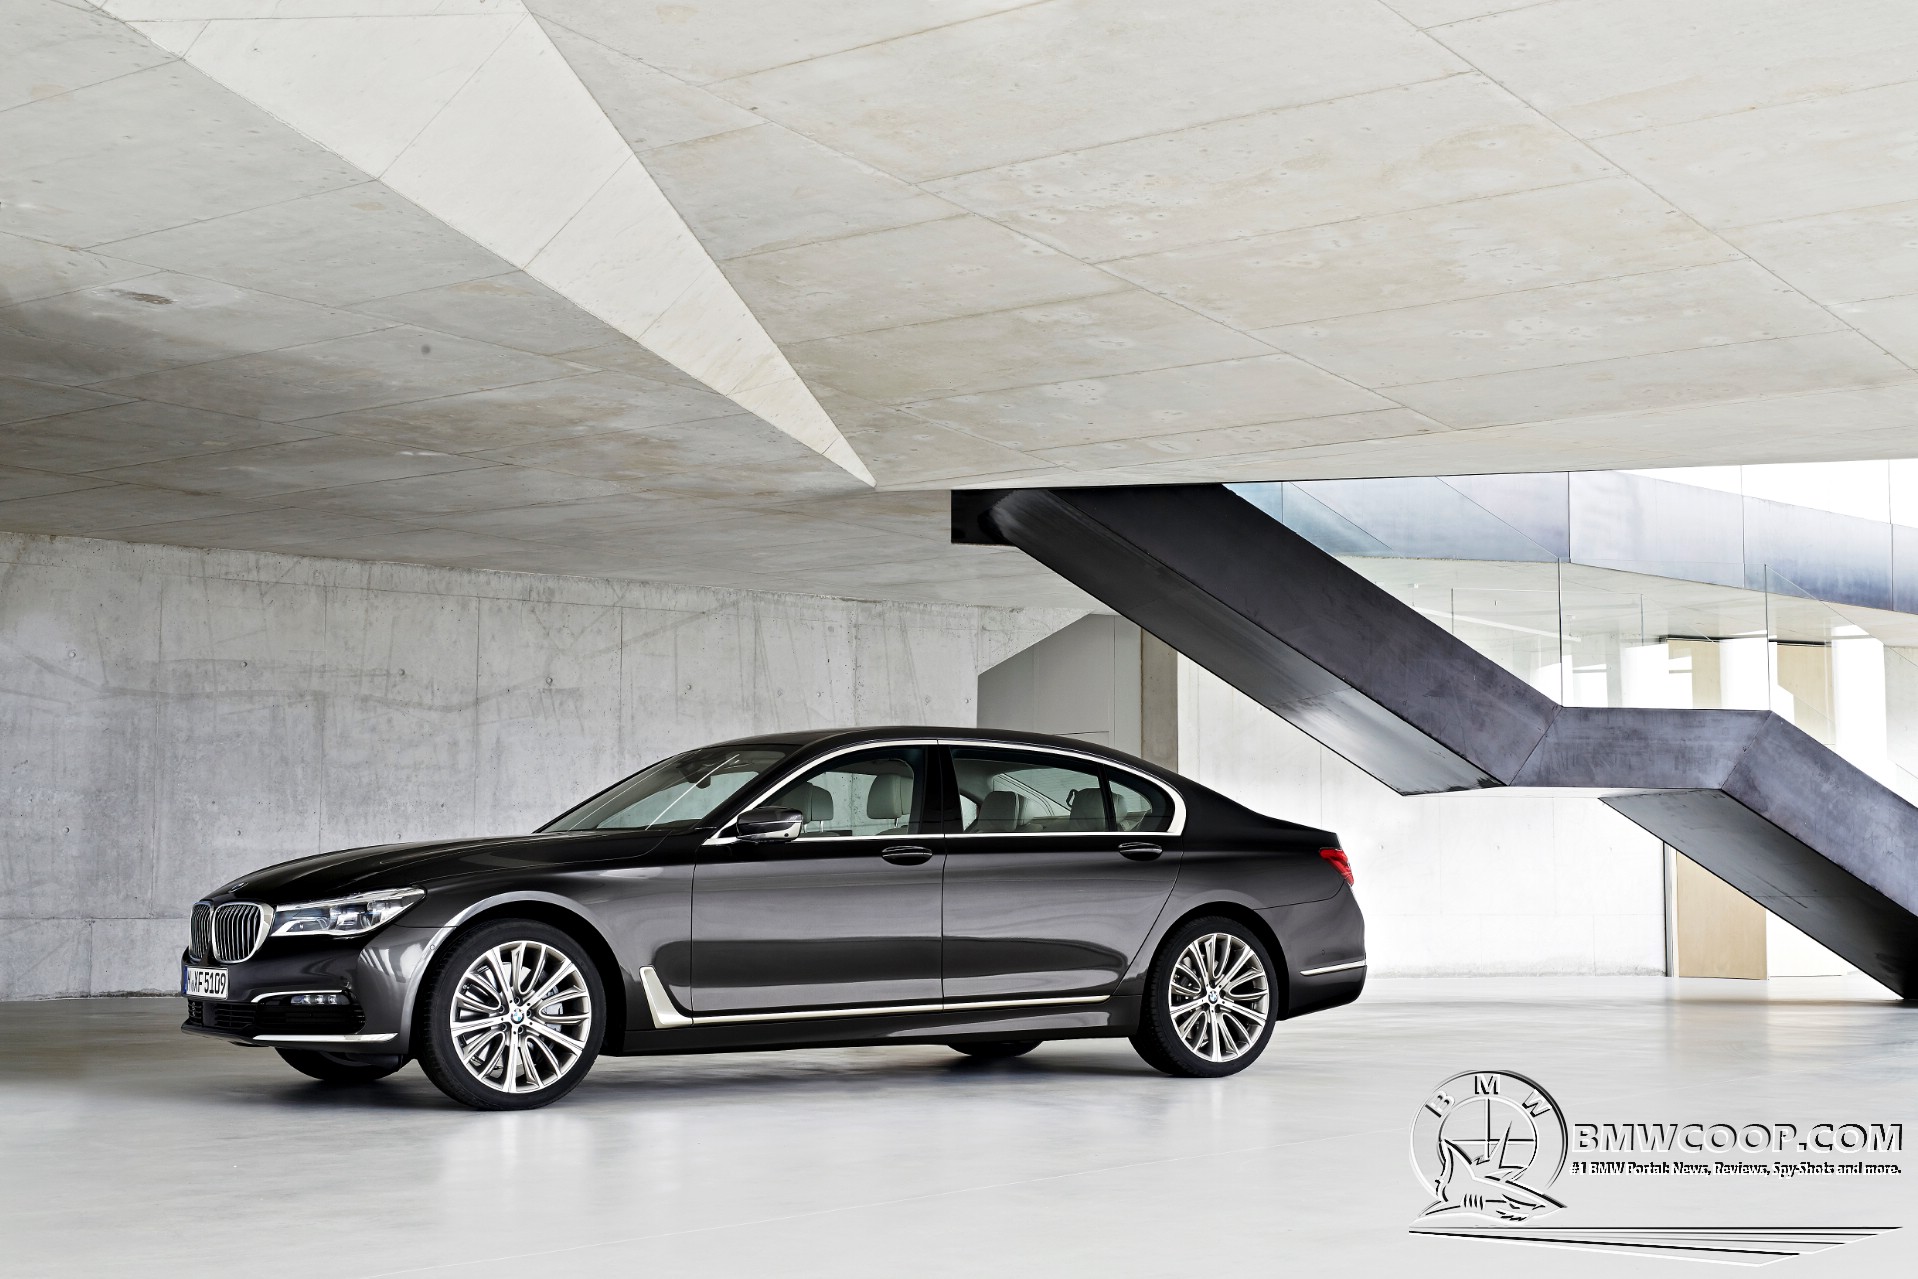 2016 G11/G12 BMW 7 Series Production